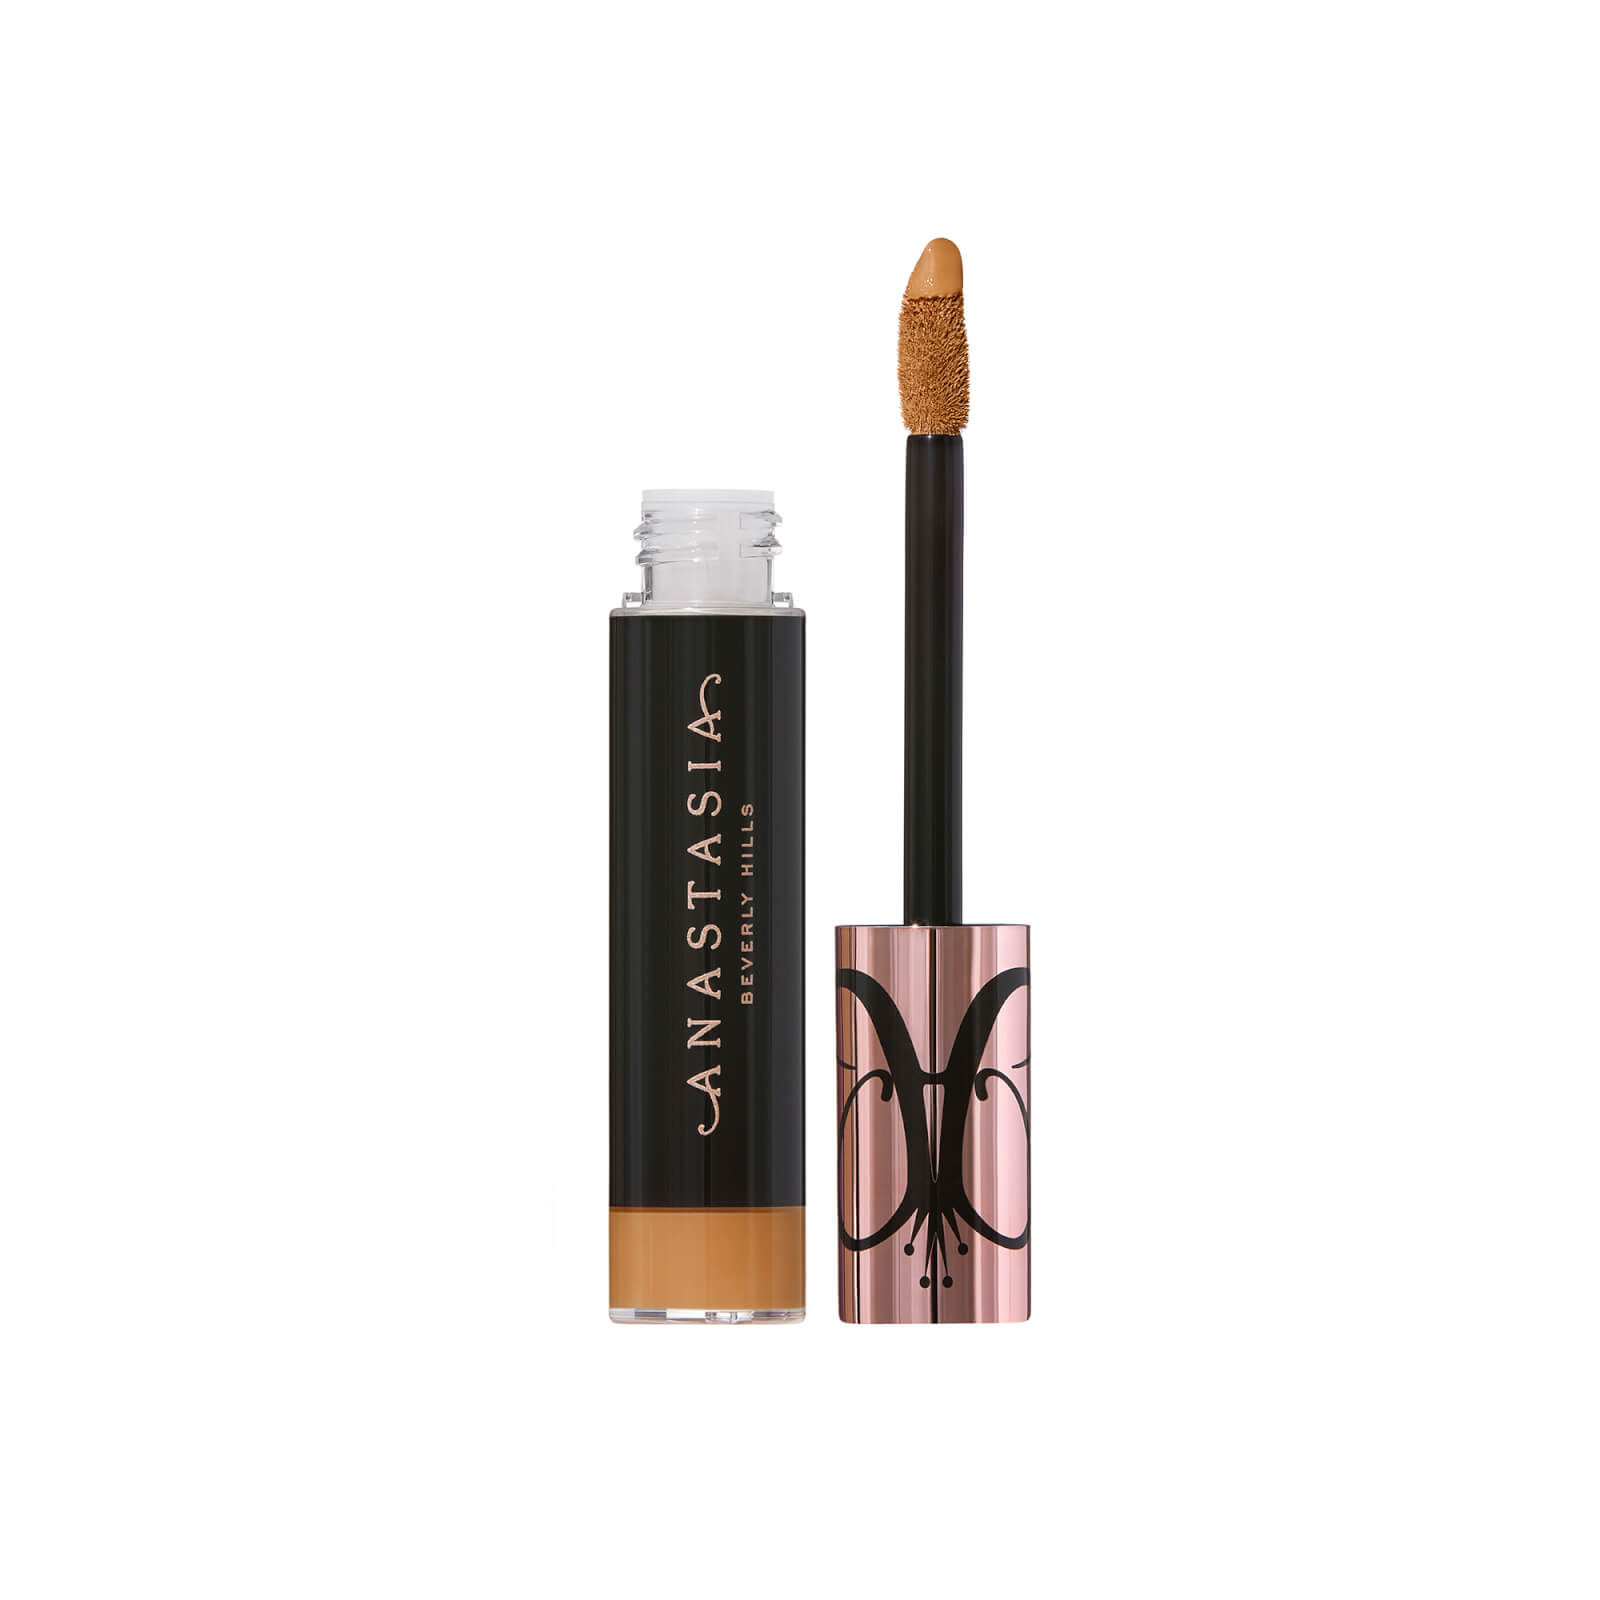 Anastasia Beverly Hills Magic Touch Concealer 12ml (Various Shades) - 21